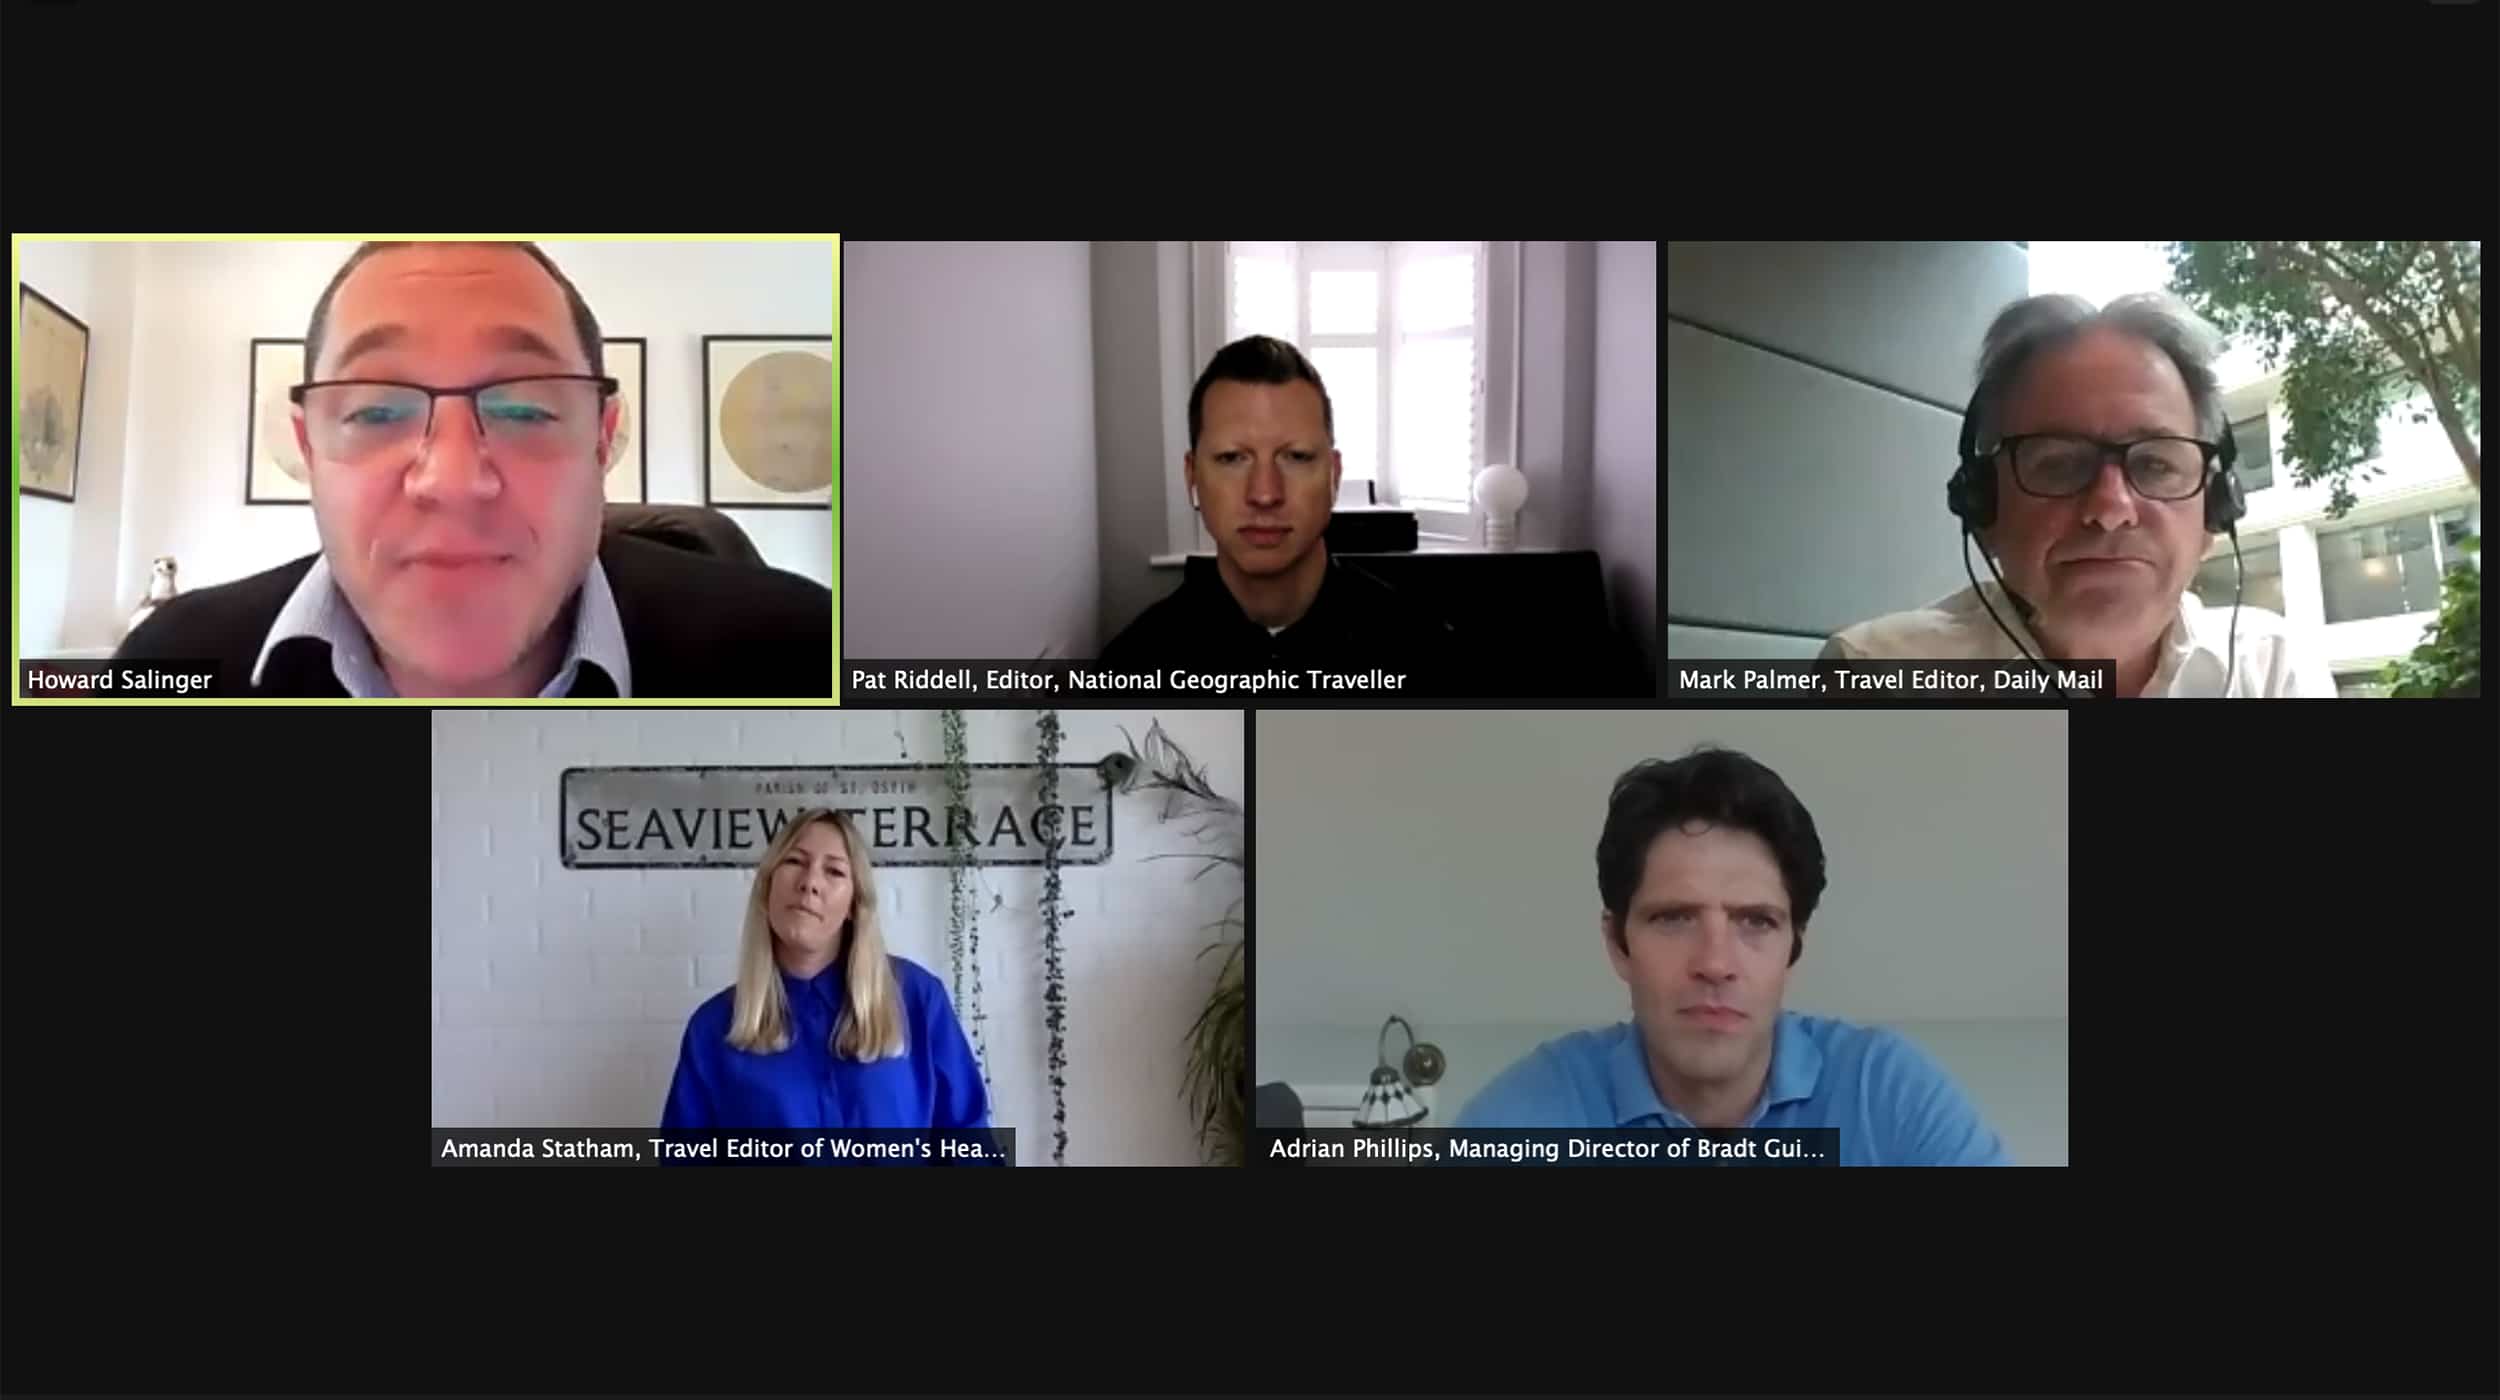 A screenshot from the Social with Media webinar.